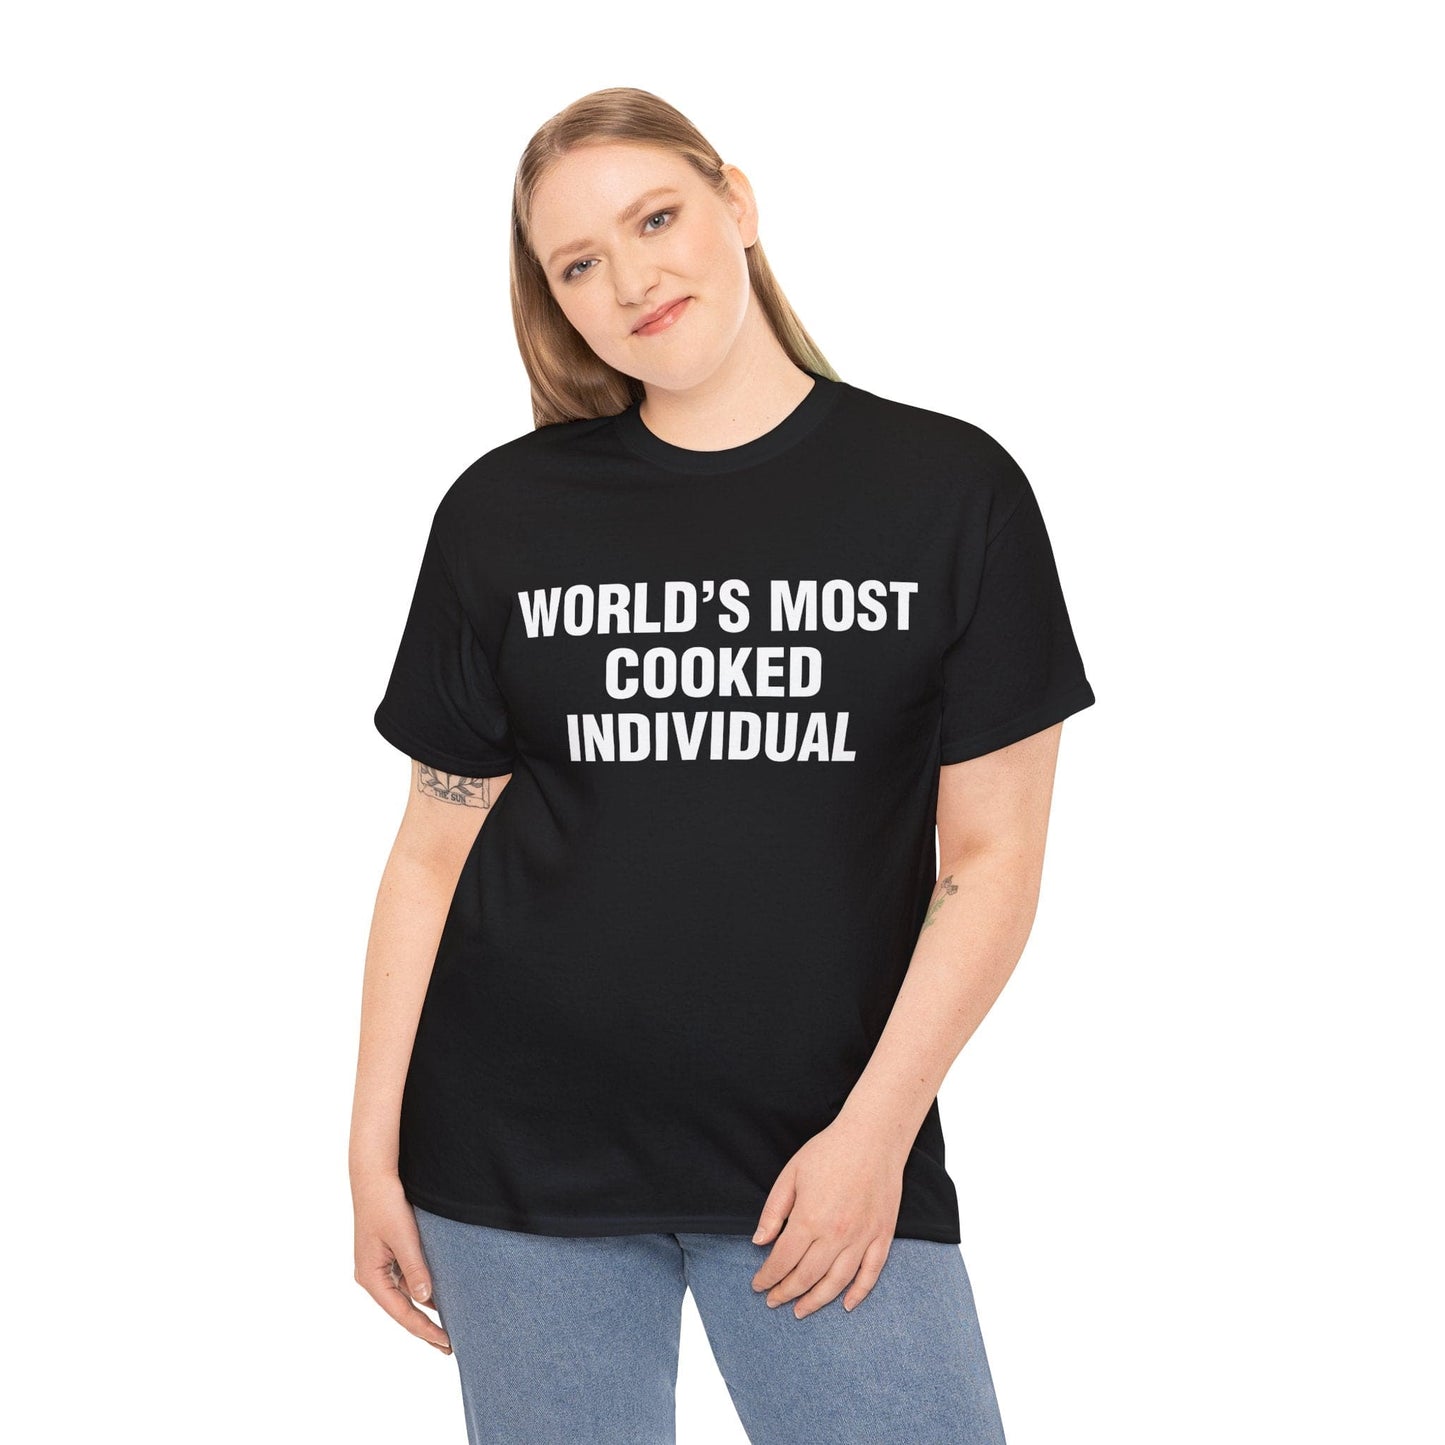 WORLD’S MOST COOKED INDIVIDUAL